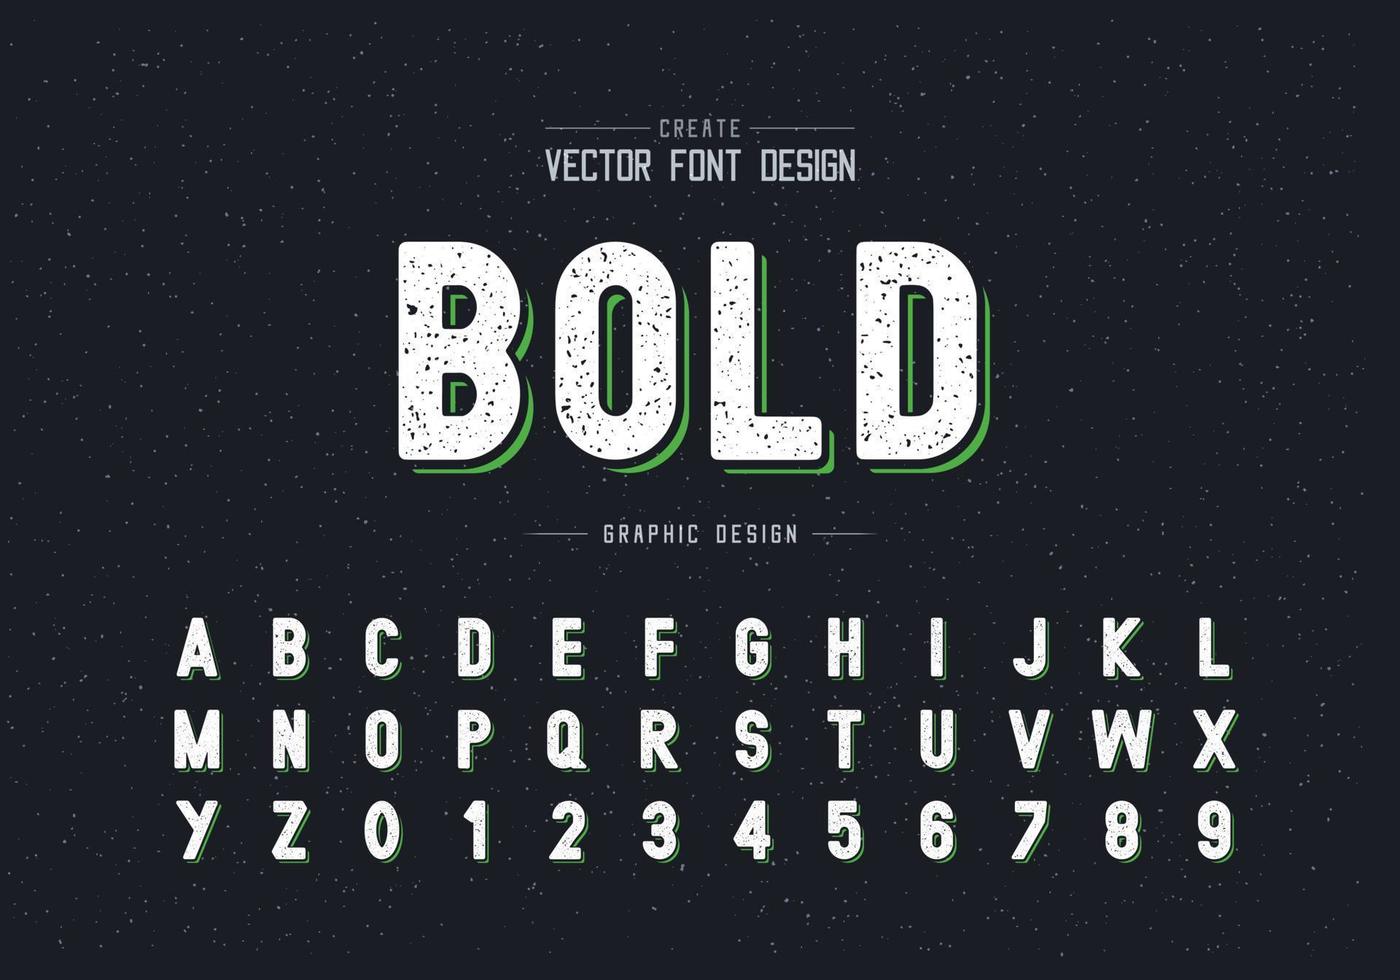 Texture Font and alphabet vector, Style typeface letter and number design, graphic text on background vector